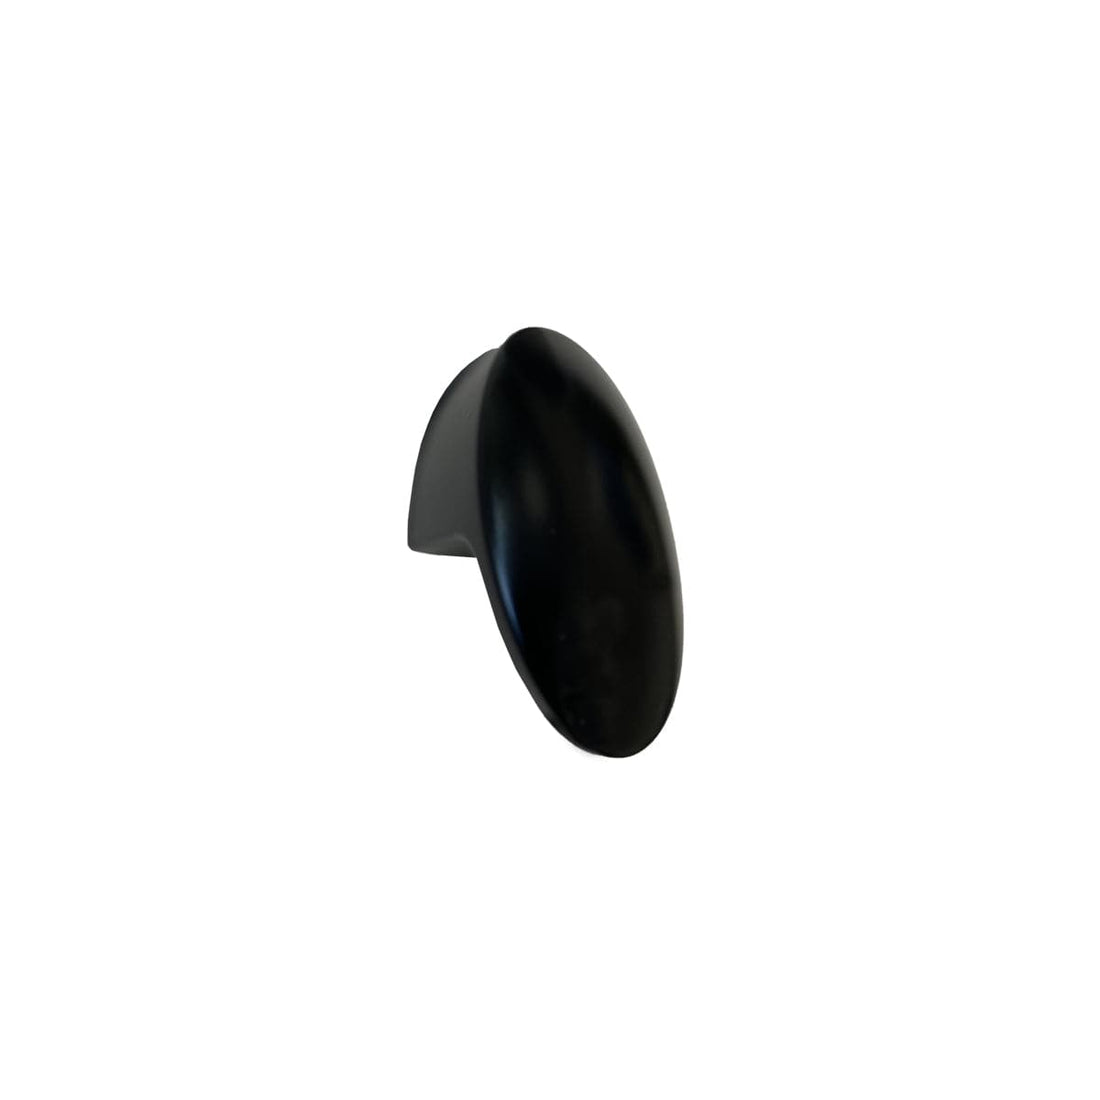 2 BLACK RECYCLED PLASTIC 36X18MM KNOBS